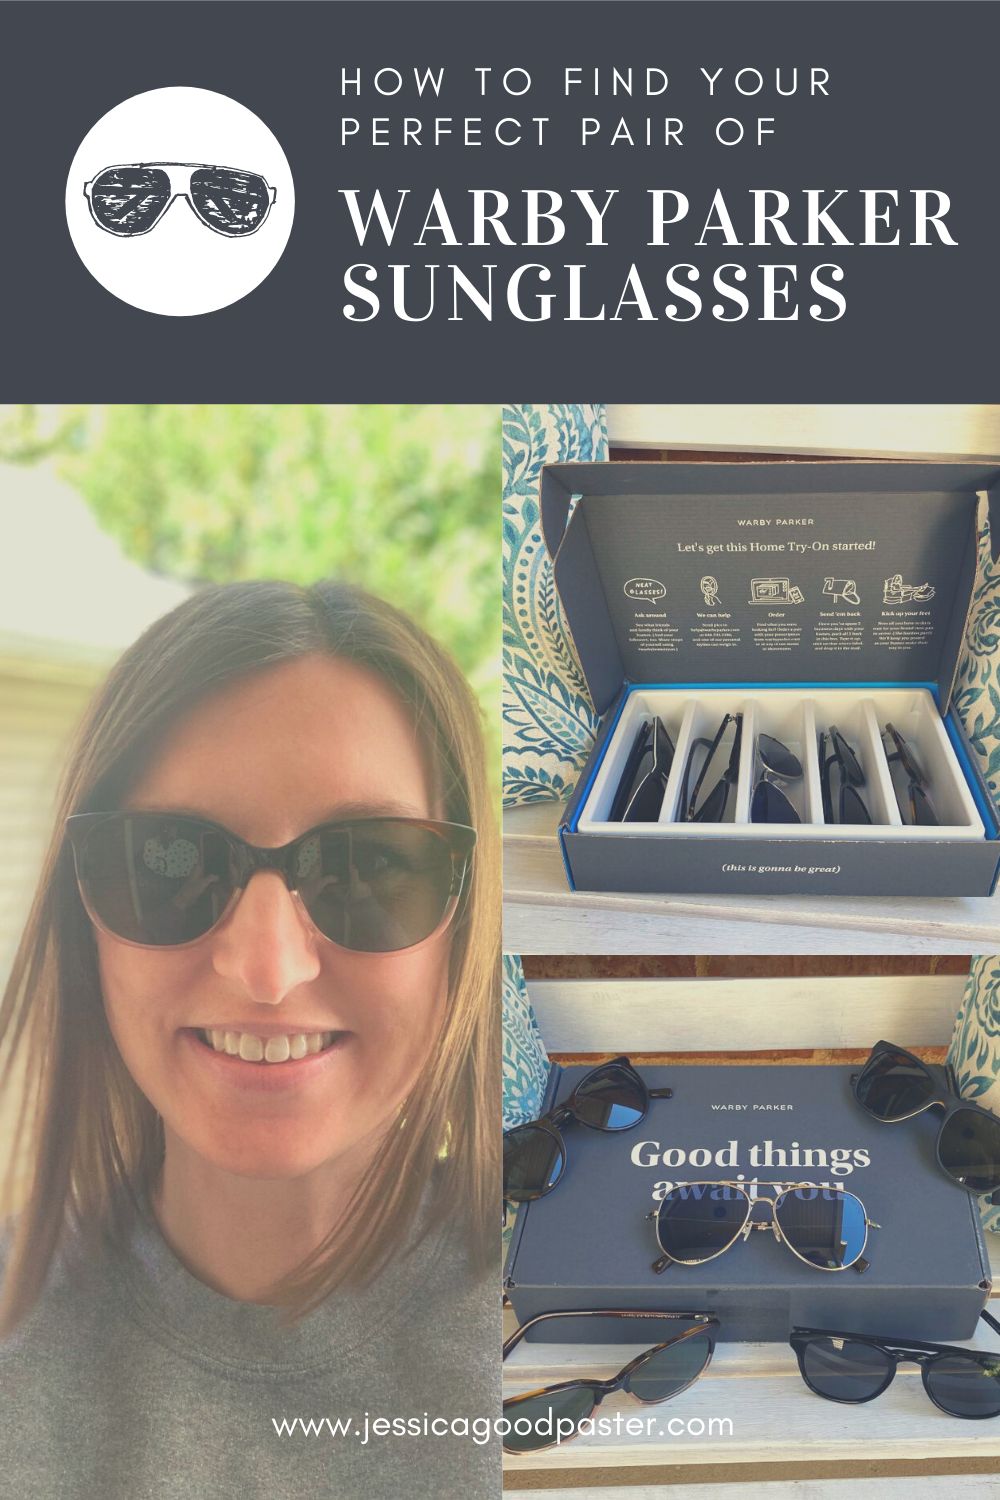 How to Find Your Perfect Pair of Prescription Sunglasses | The Home Try-On Program from Warby Parker lets you test out five pairs of sunglasses for free! Get affordable, stylish prescription sunglasses from the comfort of your house. Check out my experience with the Fall 2020 Collection today. #warbyparker #sunglasses #shopathome #glasses